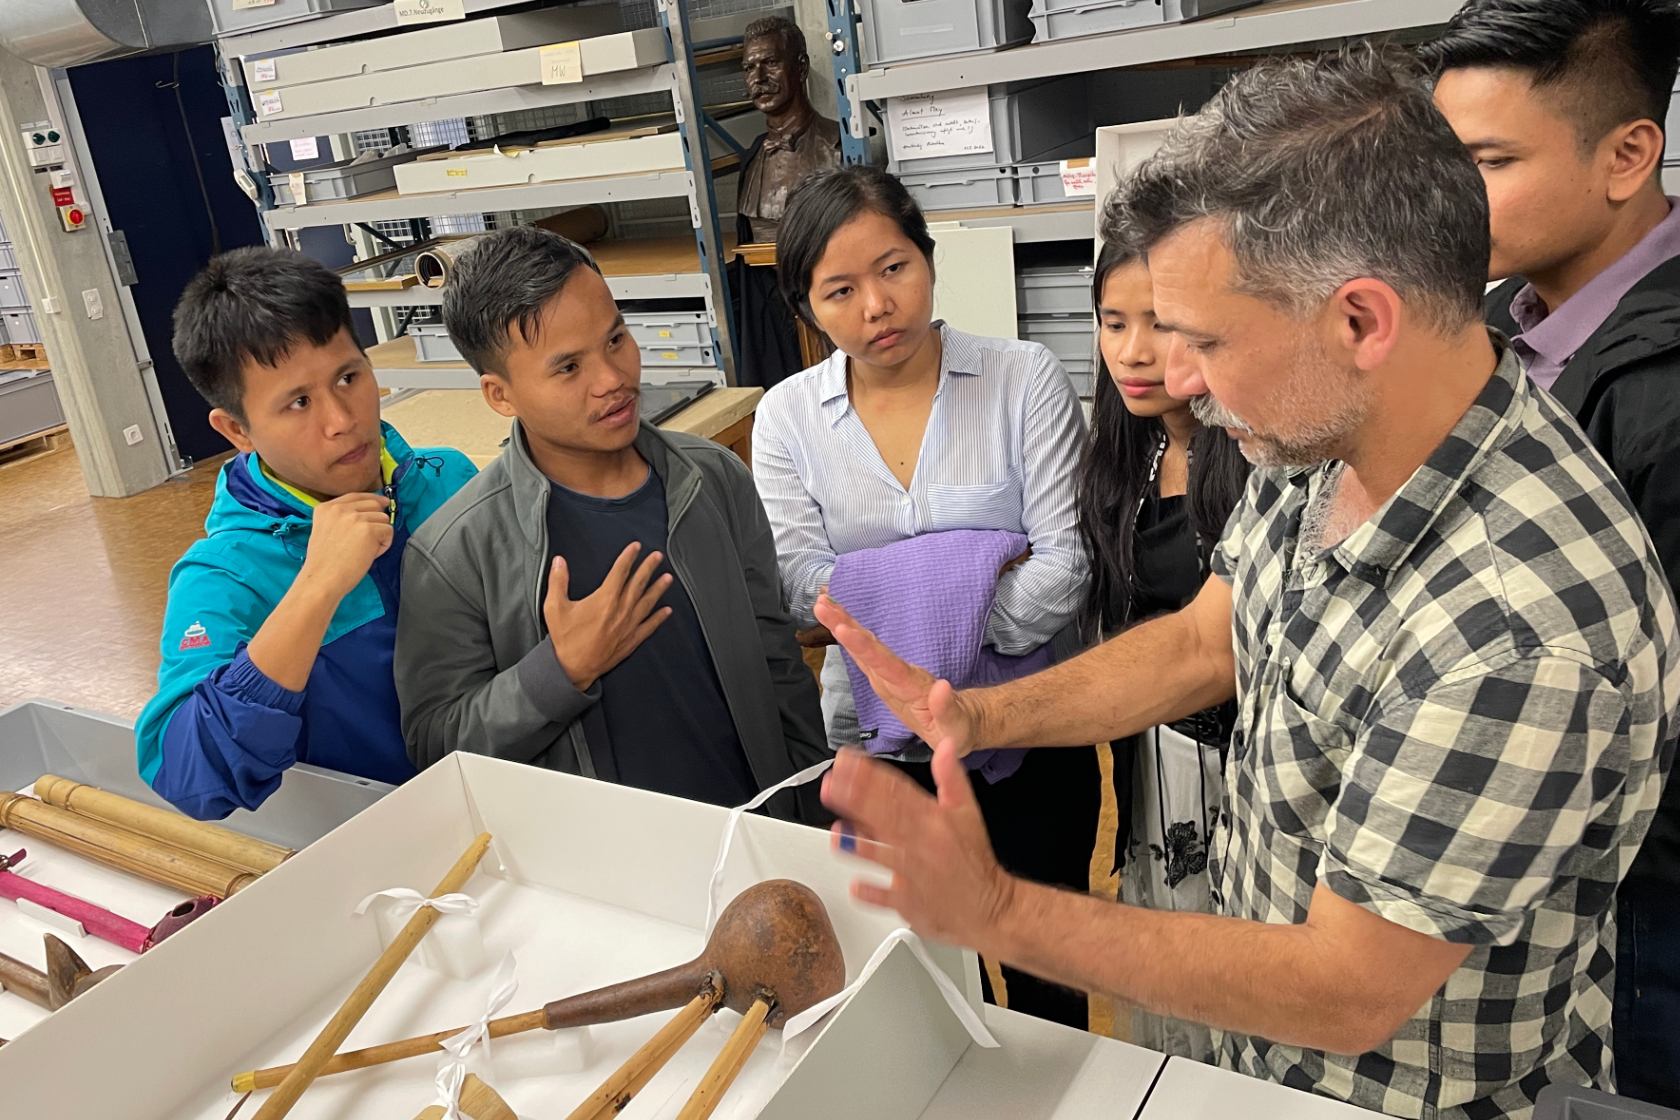 The students from the Chittagong Hill Tracts – Ralong Khumi, Thongpong Mro, Zing Ruat Par Bawm, Zoneikim Pangkhua and U Shamong Kheyang –  discuss with conservator Robert Tobler a gourd pipe in the museum's collection.